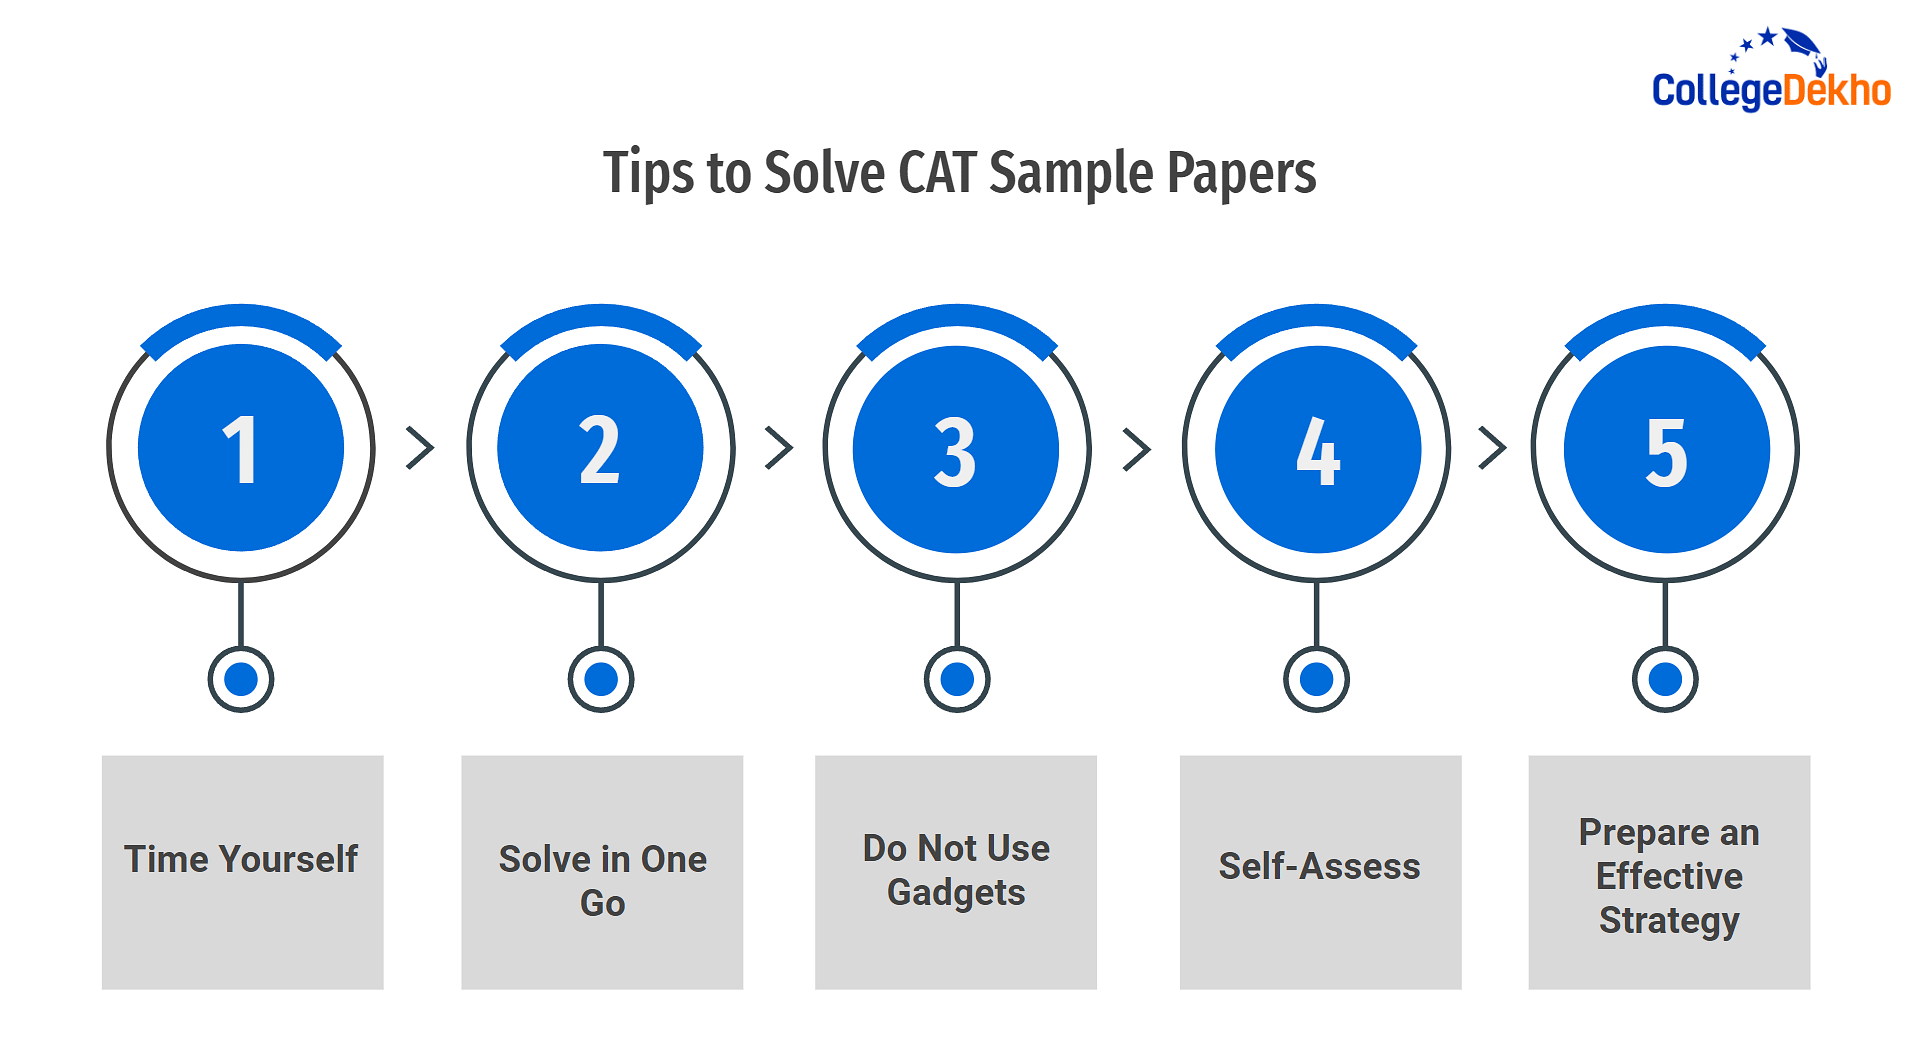 Tips to Solve CAT Sample Papers